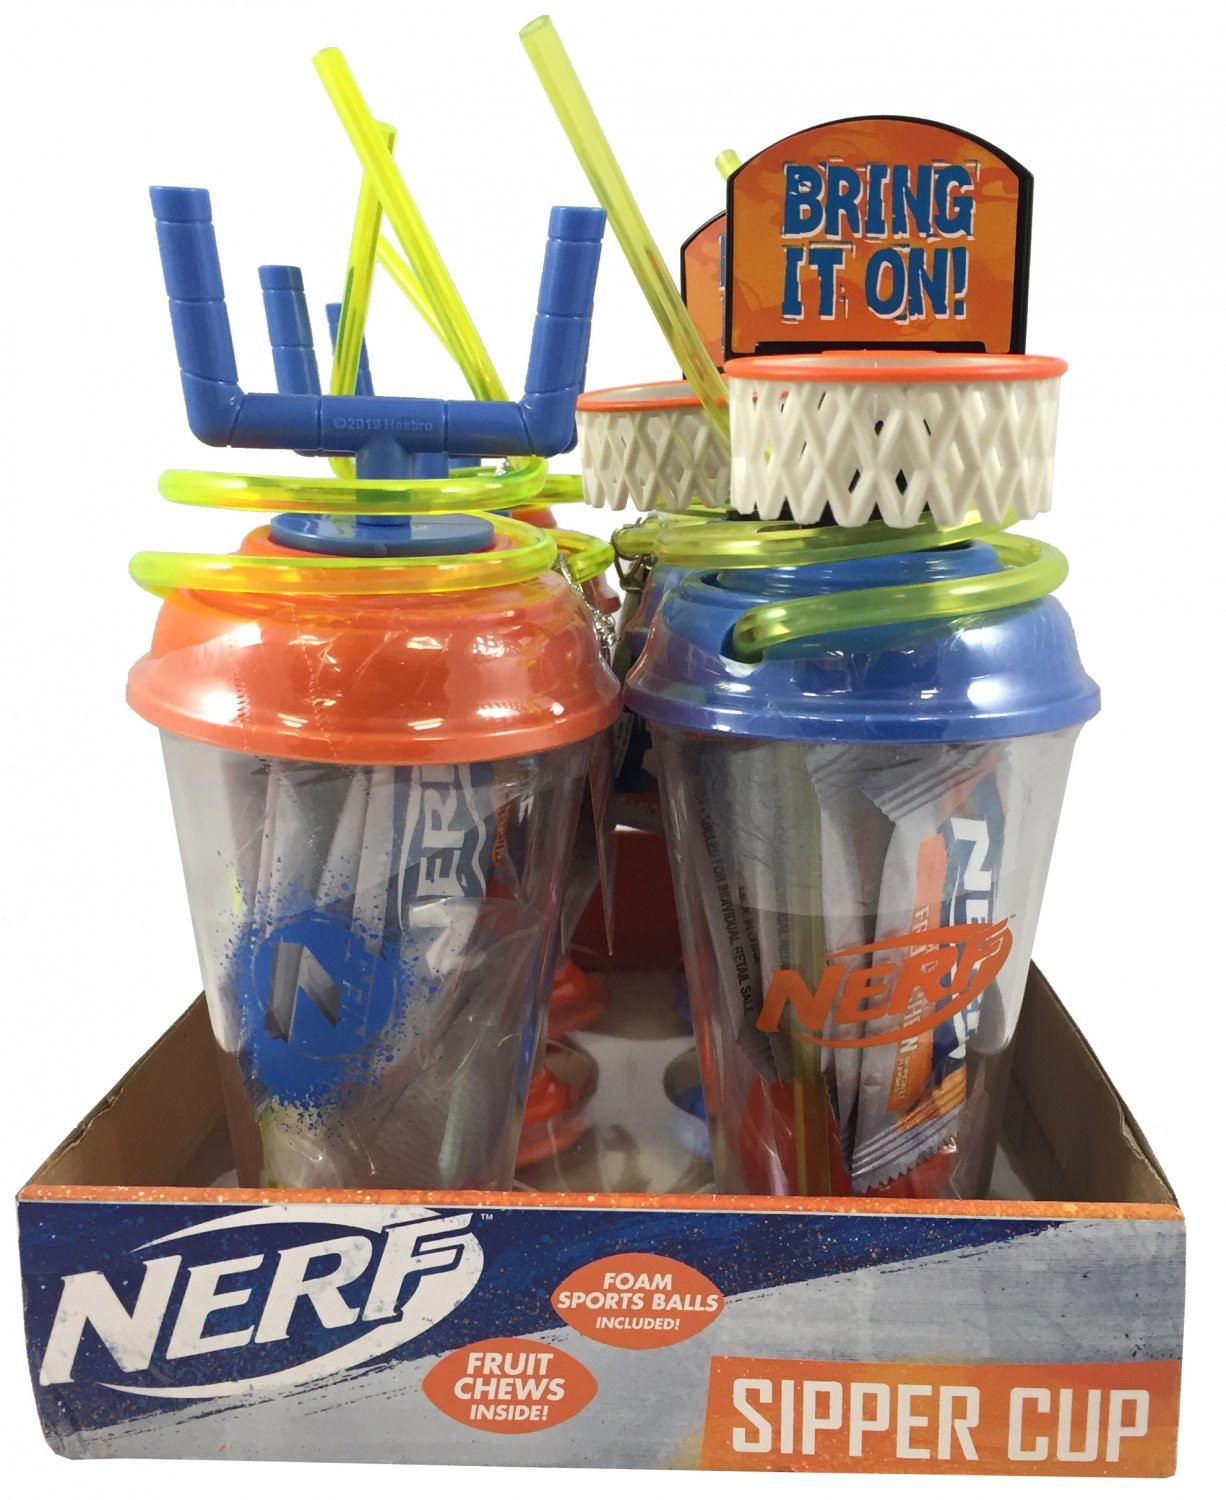 NERF NERF Sipper Cup